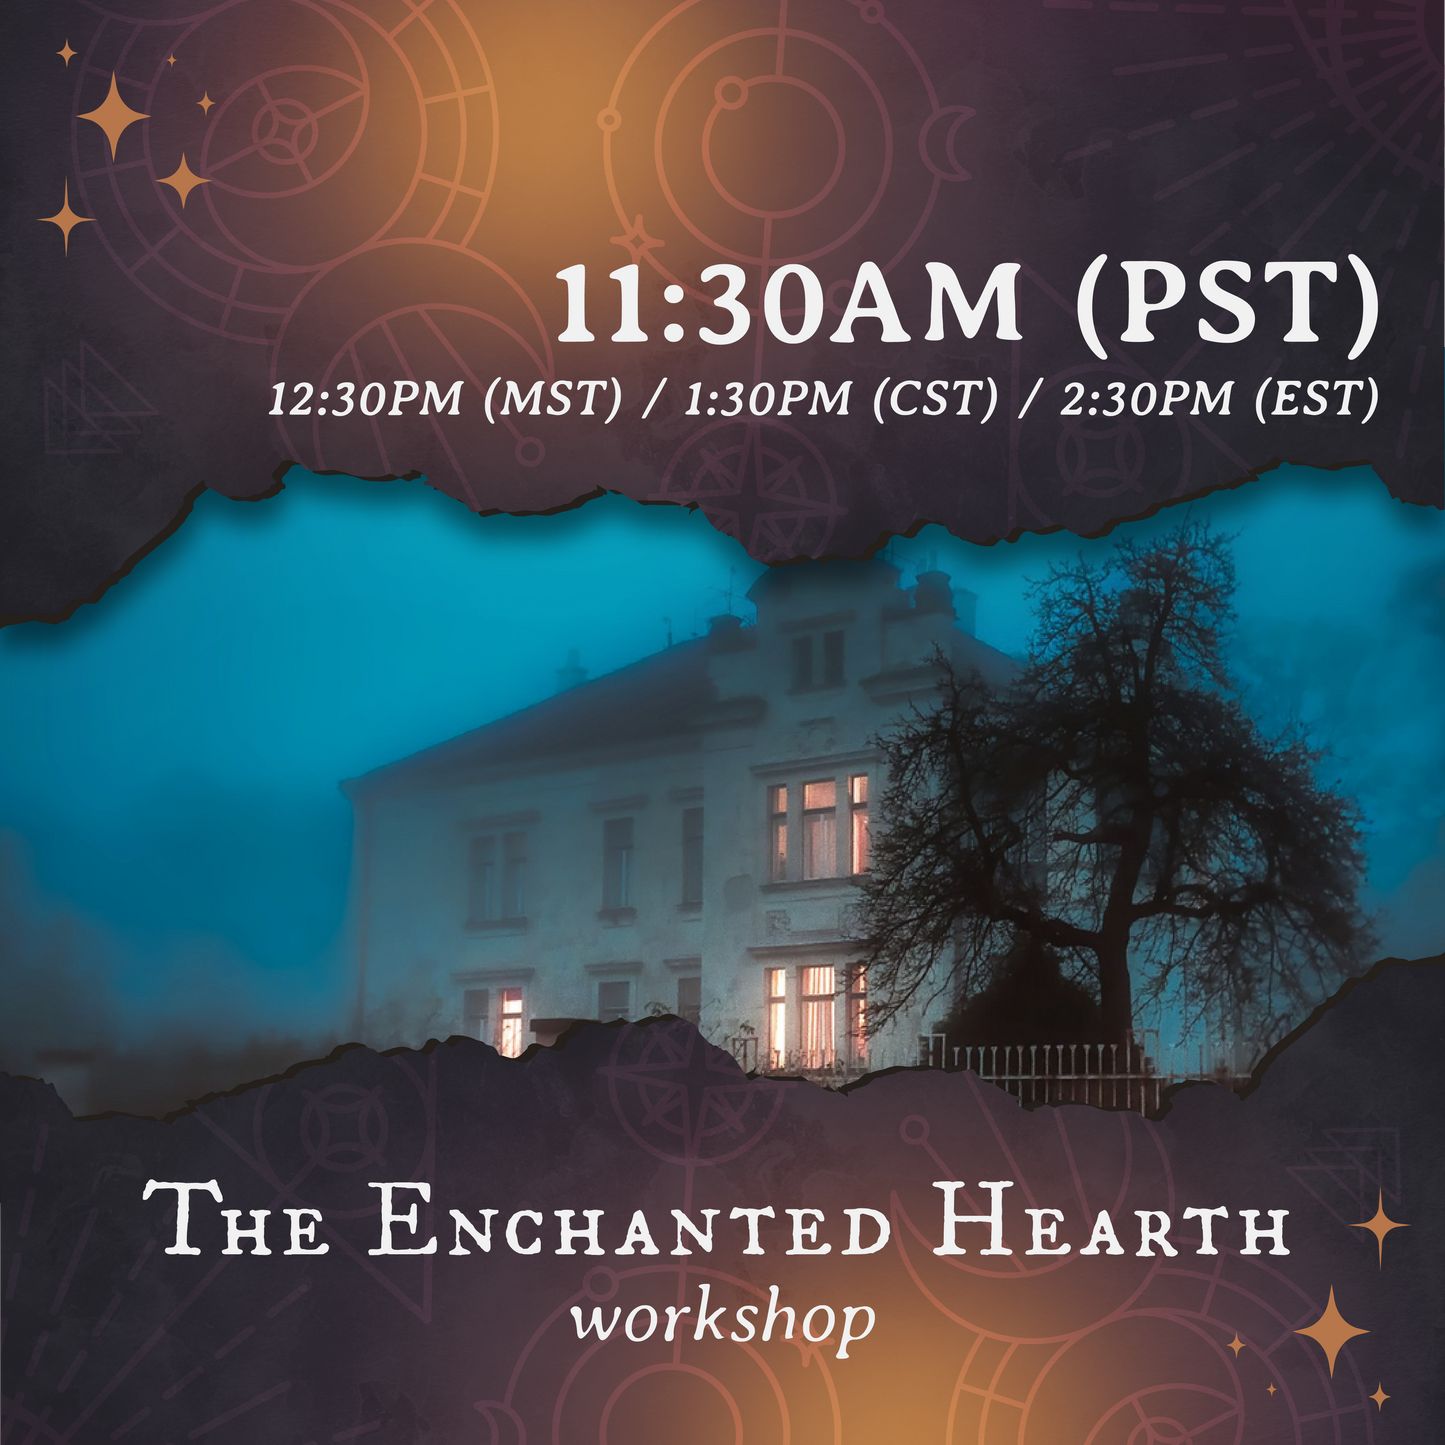 The Enchanted Hearth: Crafting a Witch's Alliance with Home